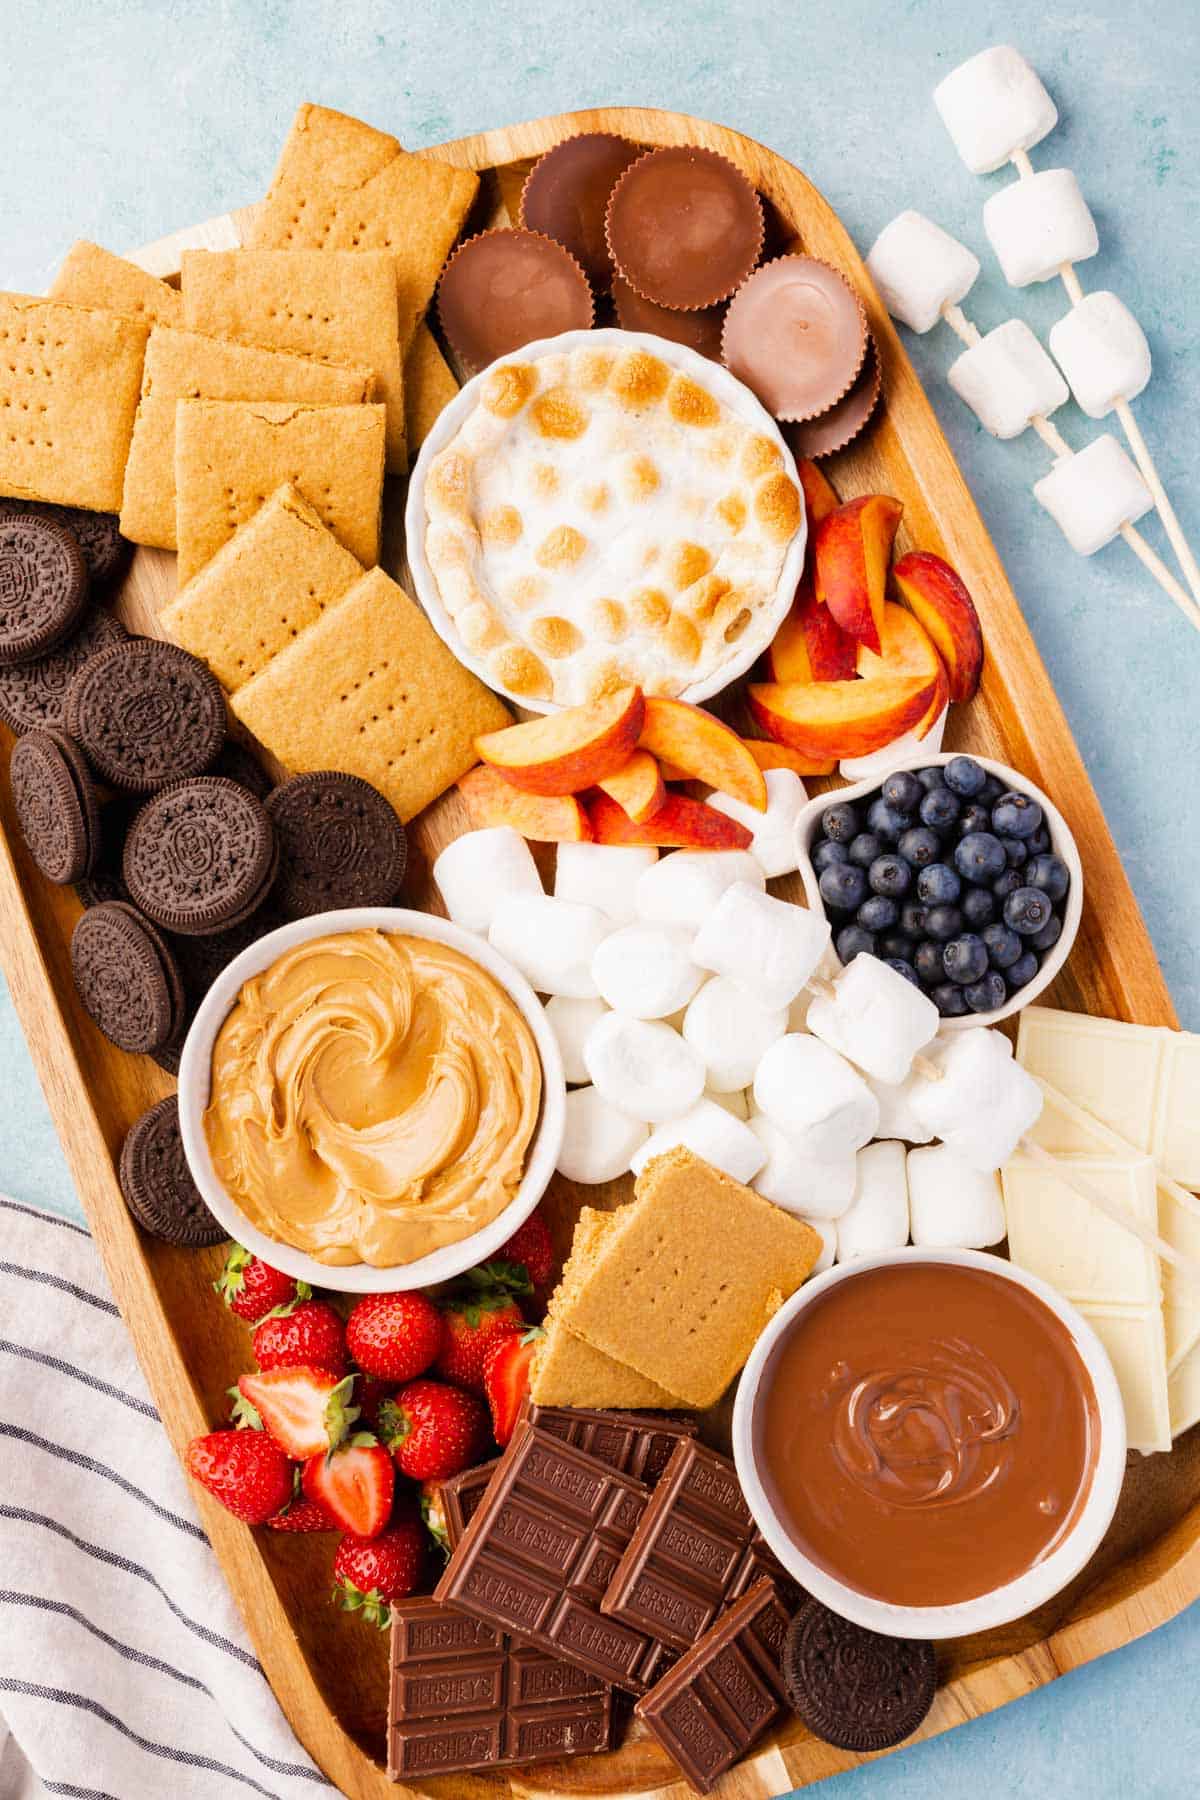 A variety of sweets and snacks including fruits, chocolates, marshmallows, and cookies arranged on a wooden platter for a dessert spread.